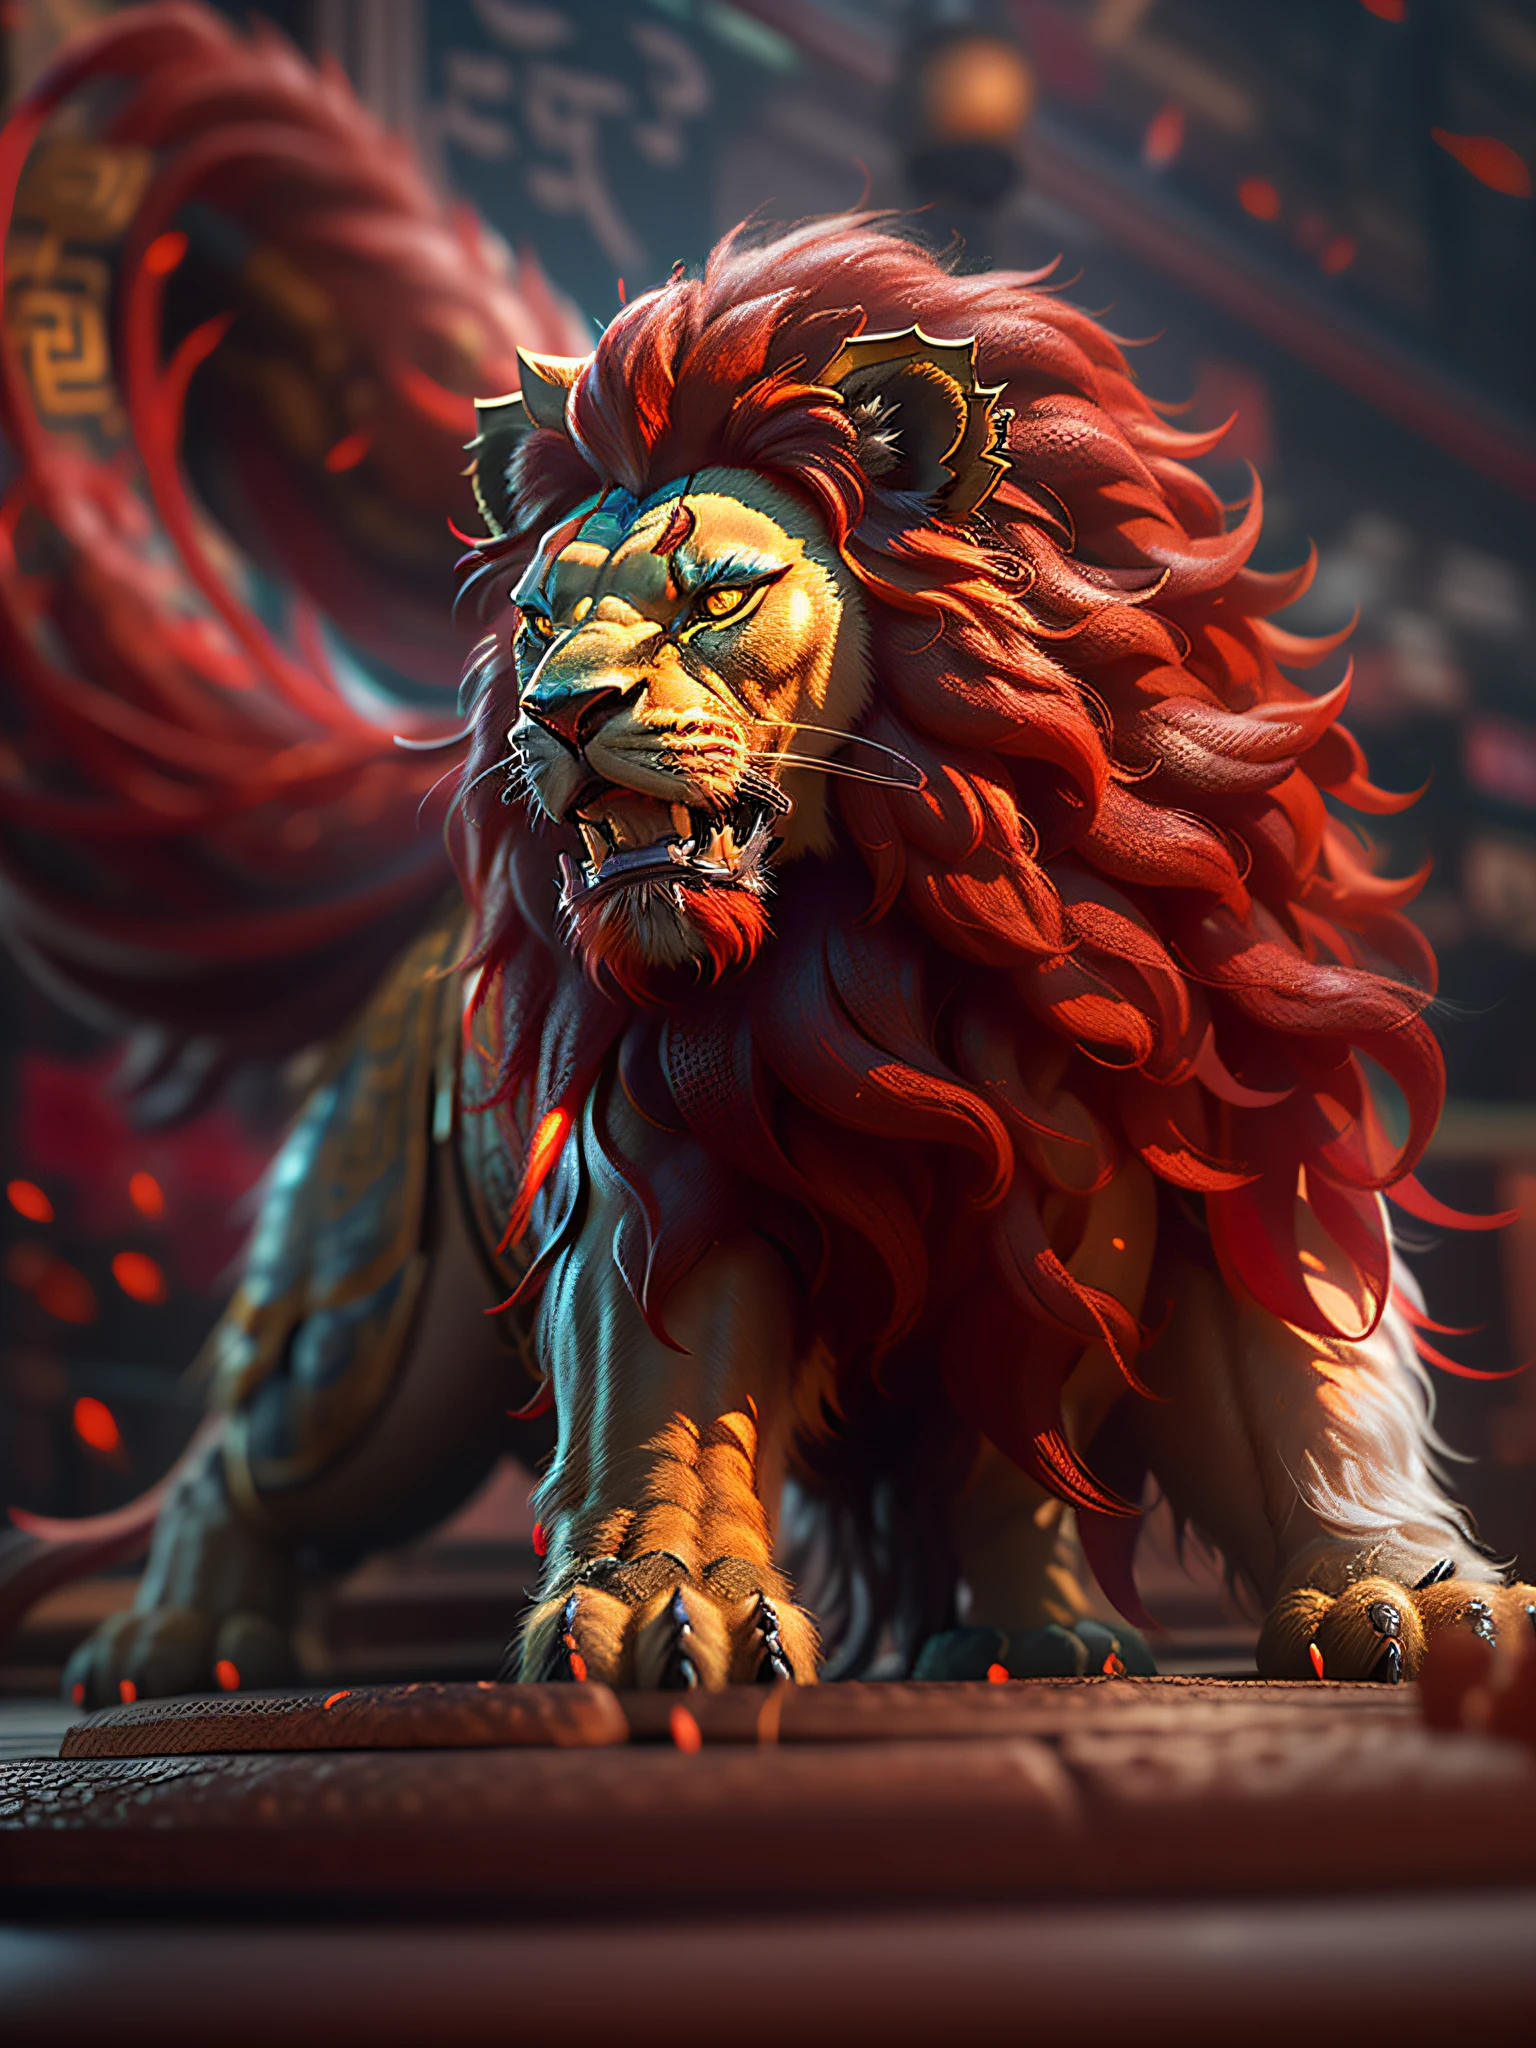 (The lion of the ancient Chinese mythical beast+Chinese mythology+Full of life，Red hair), hyperrealistic 3 d render, (Masterpiece+Best quality+high detal), Marvel at this pose，A true representation of award-winning photography+Reproduce the best visuals, perfect shot, Get eye-catching movie posters! Clear focus, Depth of field。